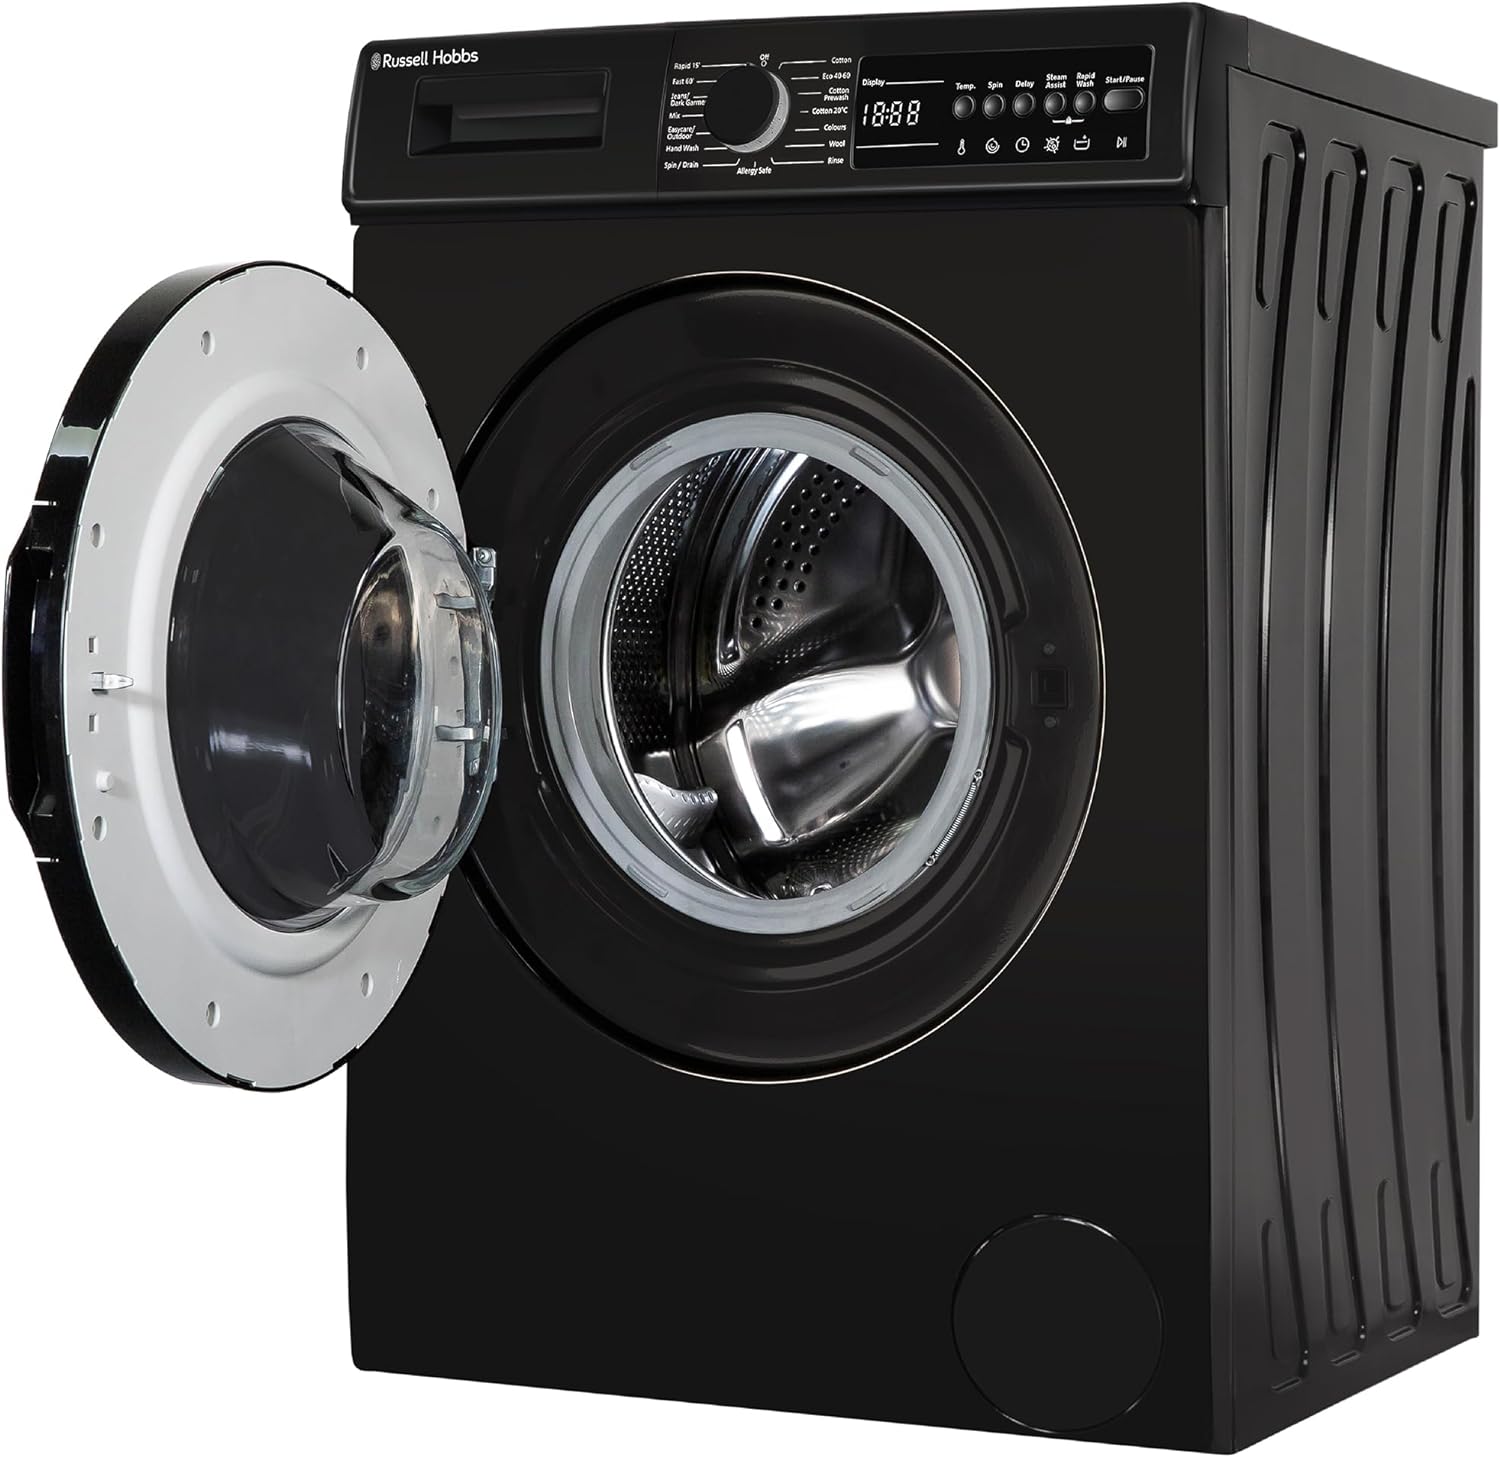 Russell Hobbs Freestanding Washing Machine, 9kg Capacity, 1400 rpm, 15 Programmes, Eco Technology, Rapid Wash Cycles, Black, RH914W116B - Amazing Gadgets Outlet